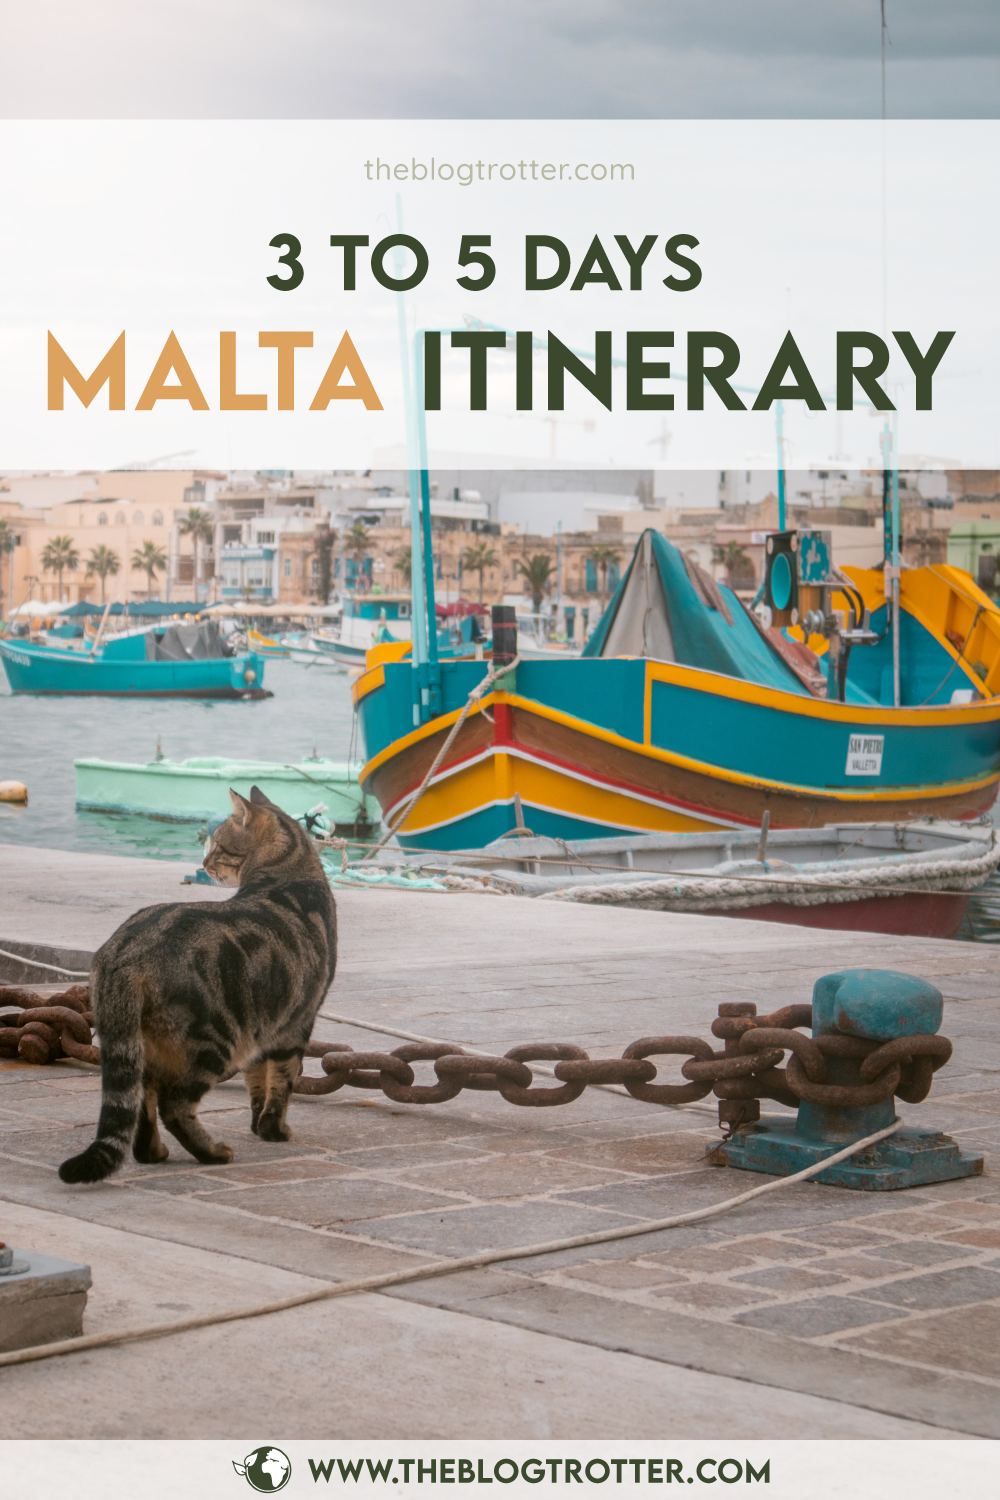 Malta itinerary article visual for Pinterest - Option 4